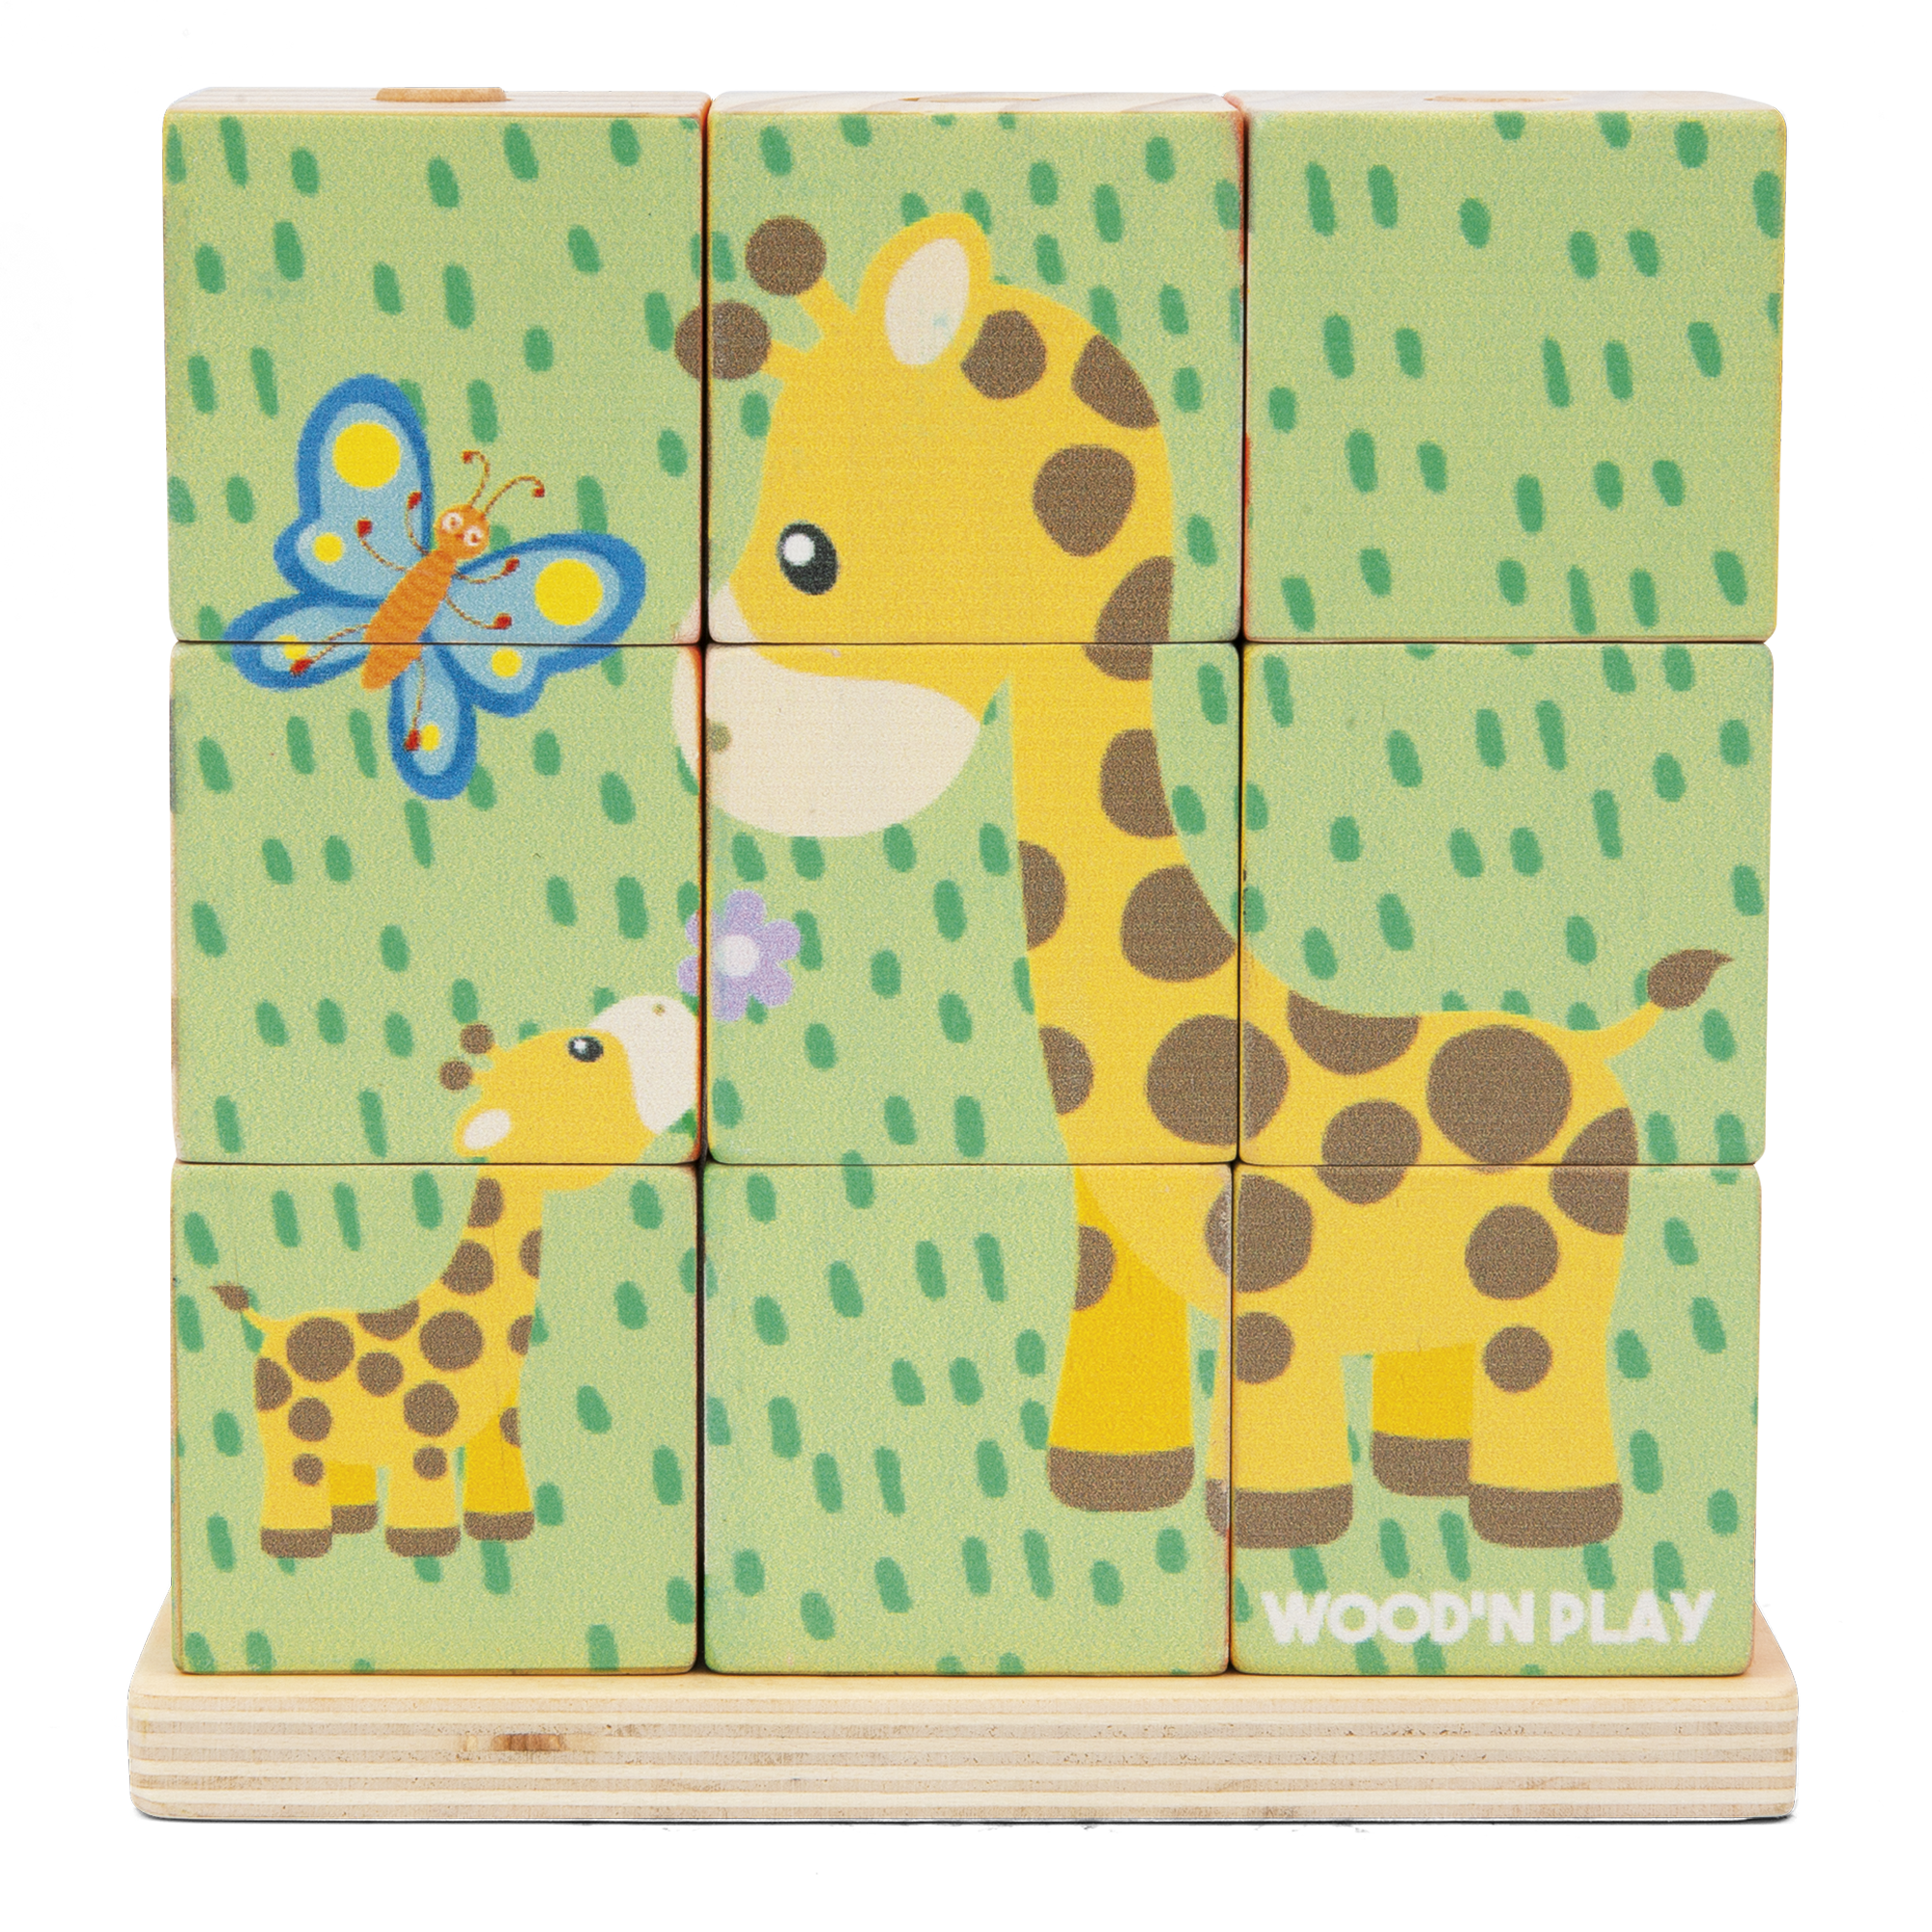 Puzzle a cubi - WOOD 'N' PLAY